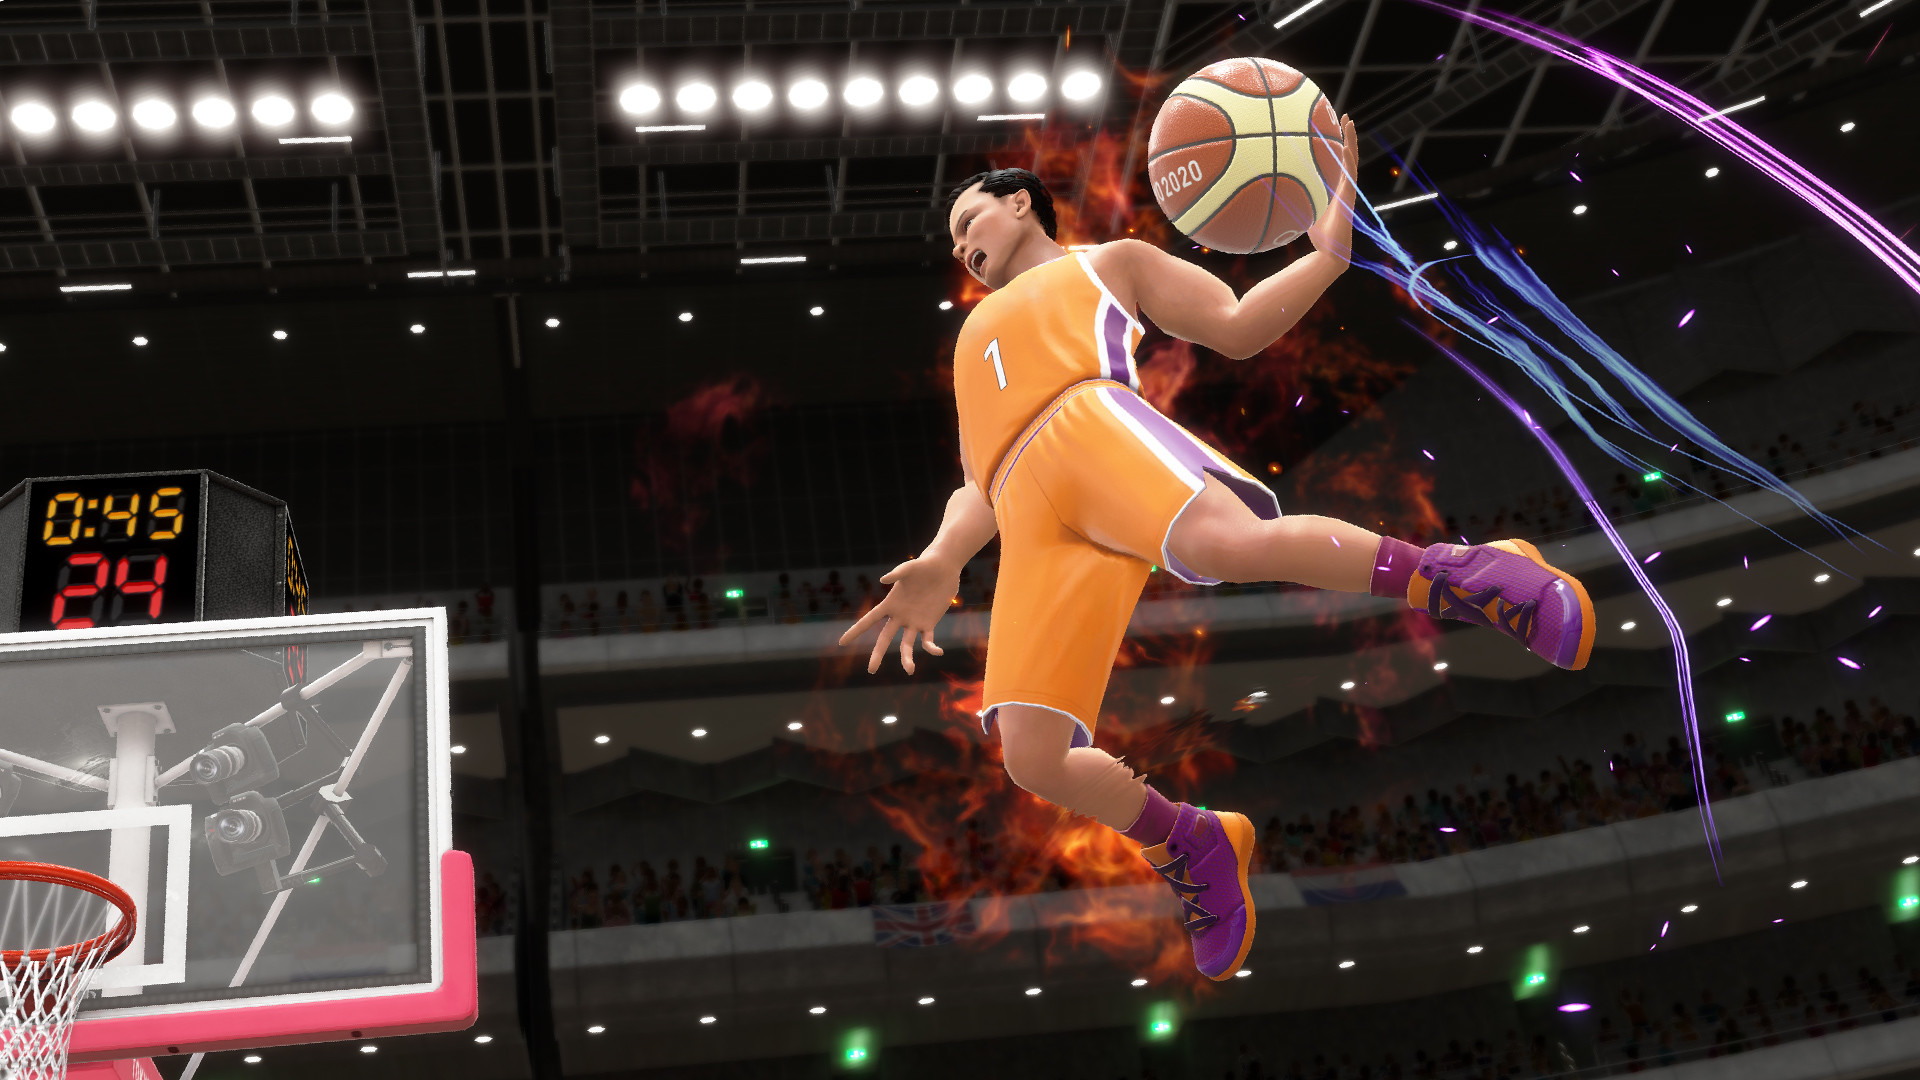 Olympic Games Tokyo 2020 - The Official Video Game - screenshot 5